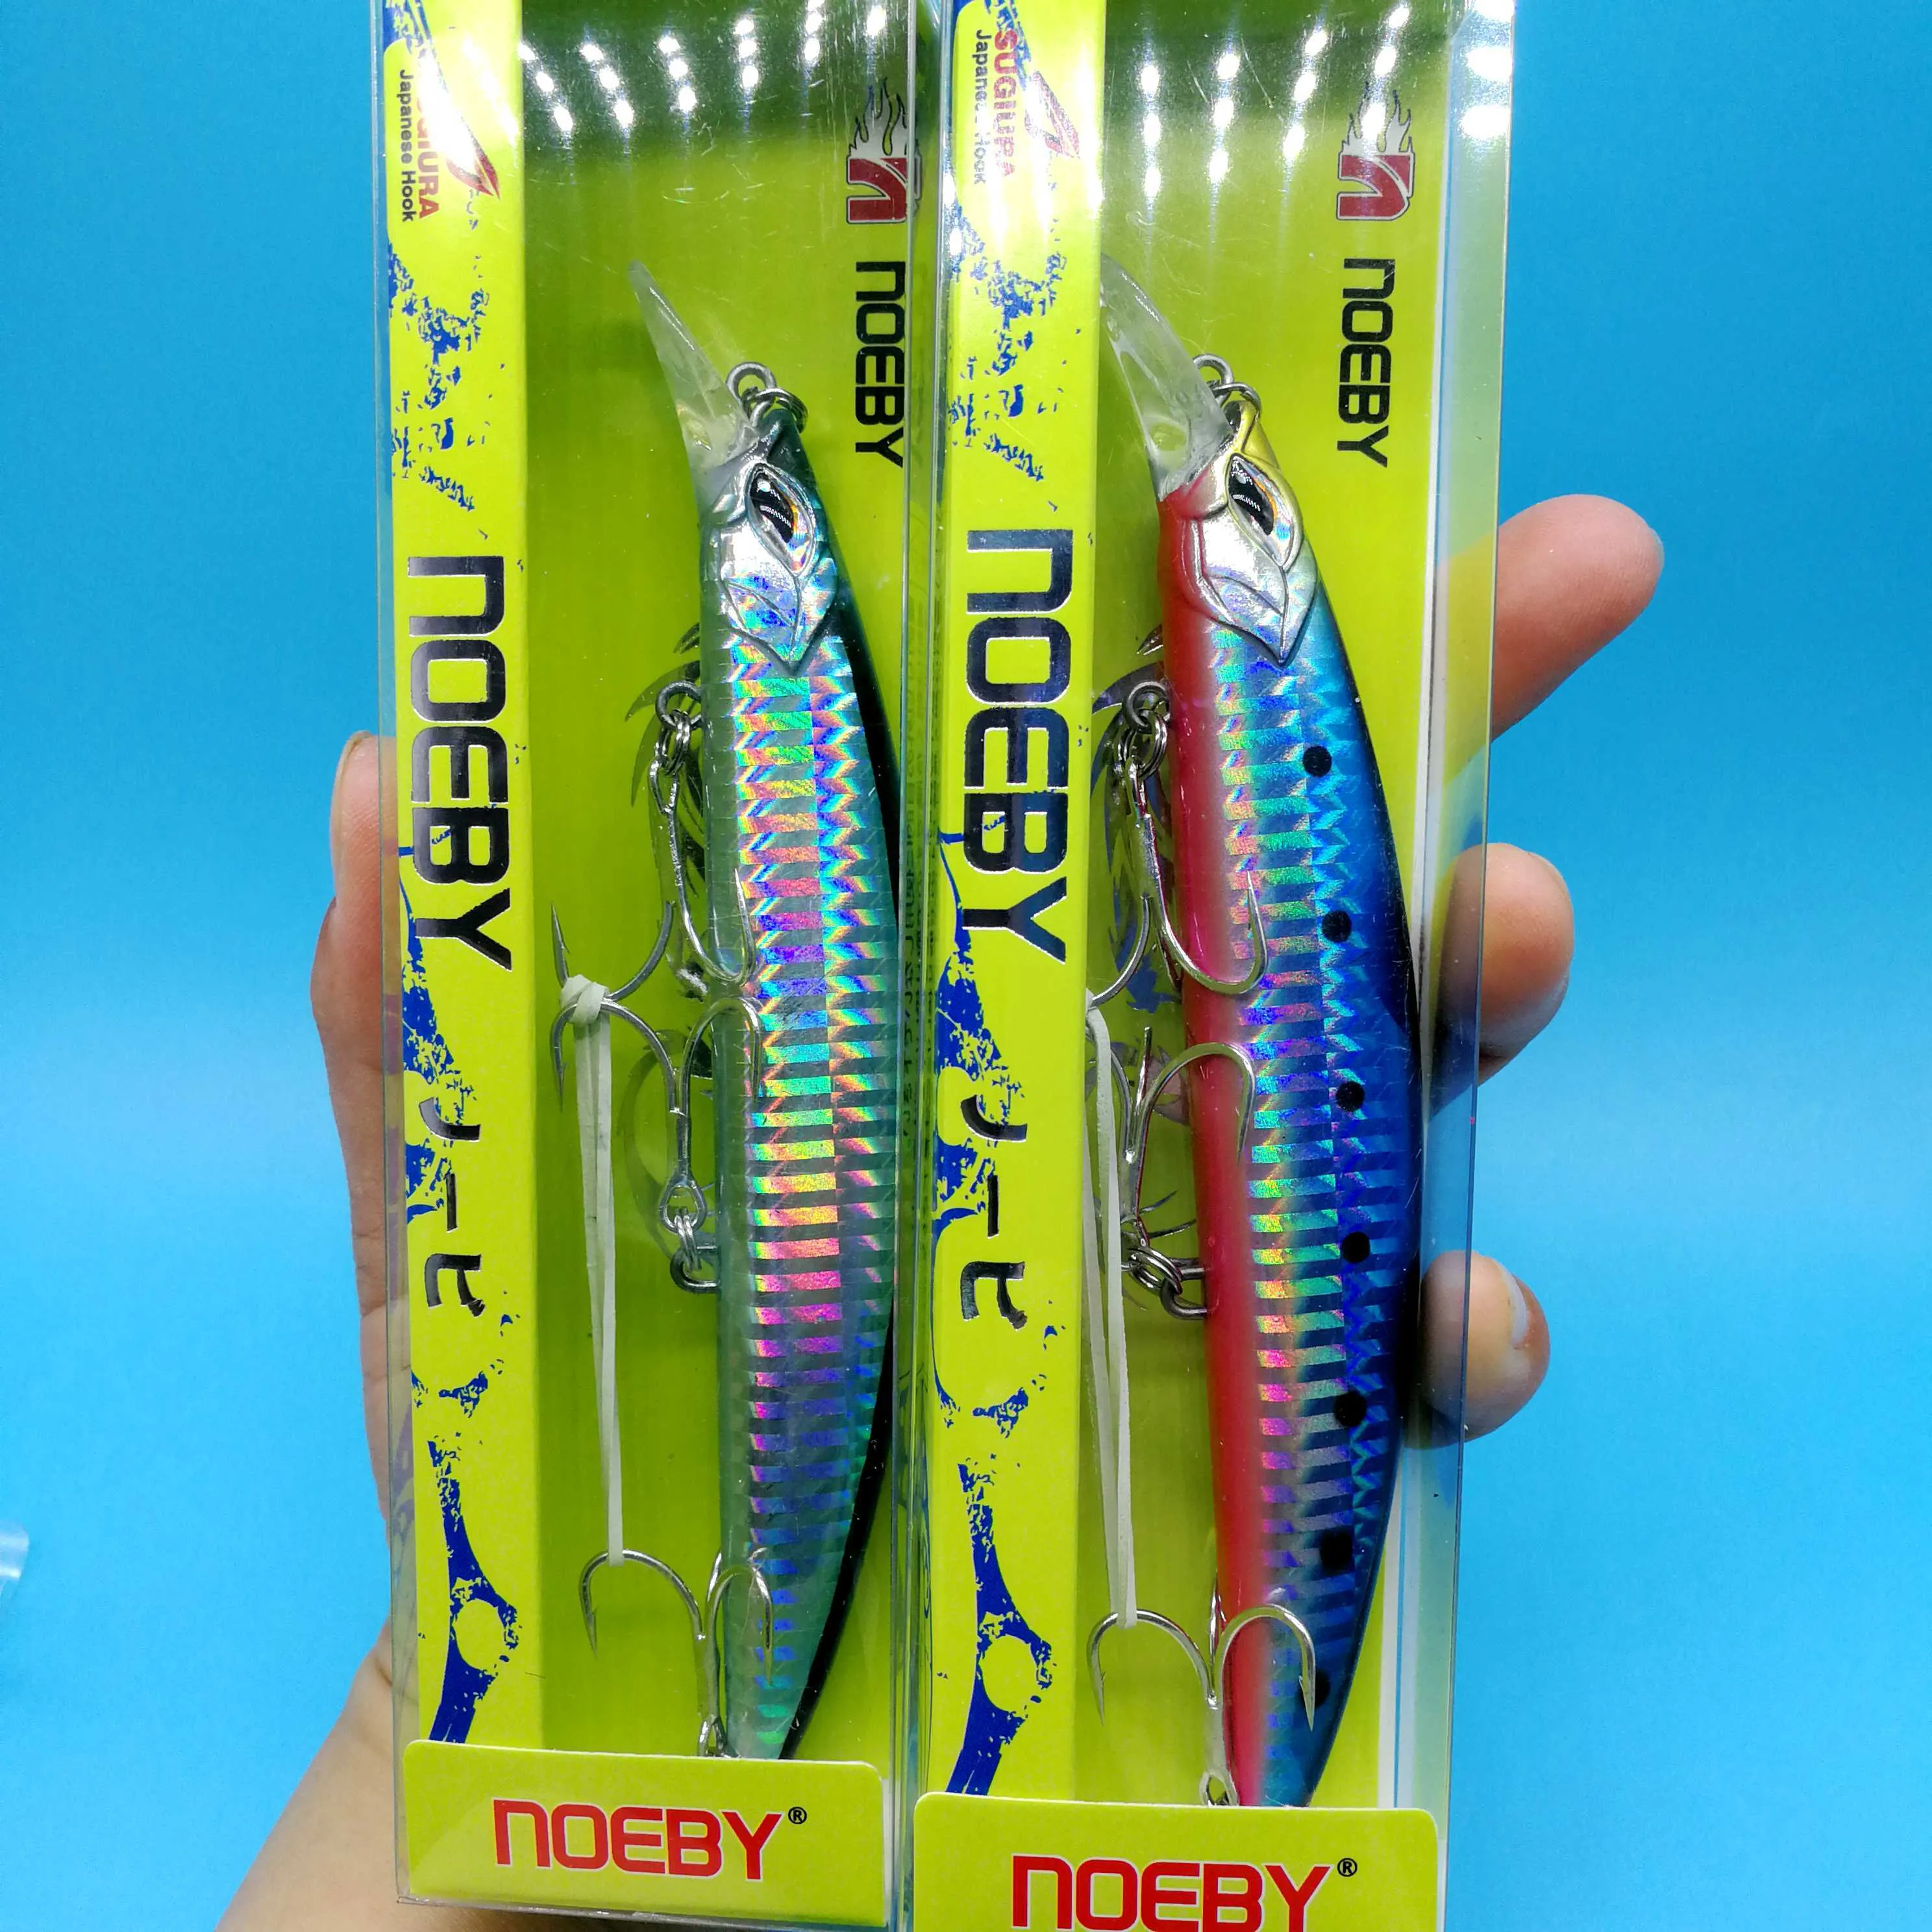 NOEBY 2019 Floating Minnow Rainbow Trout Lures Set 23g/130mm, 0 1.5m Depth,  Wobbler Hard Bait For Saltwater Fishing Tackle T200602 From Chao07, $13.95